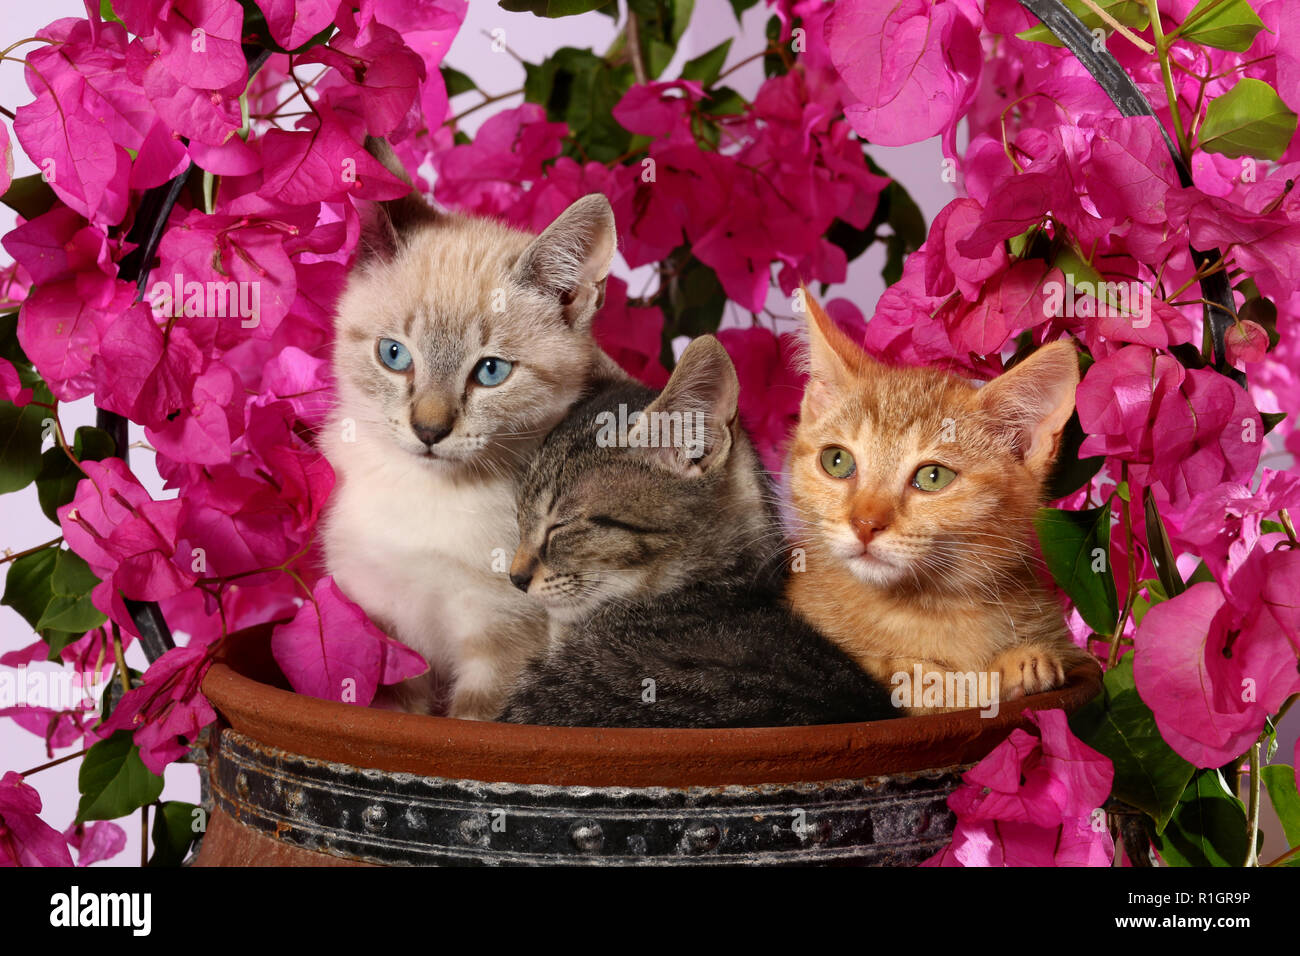 3 kittens, 3 month old, seal tabby point, black tabby and red tabby, sitting in a flower pot with flowering bougainvillea Stock Photo